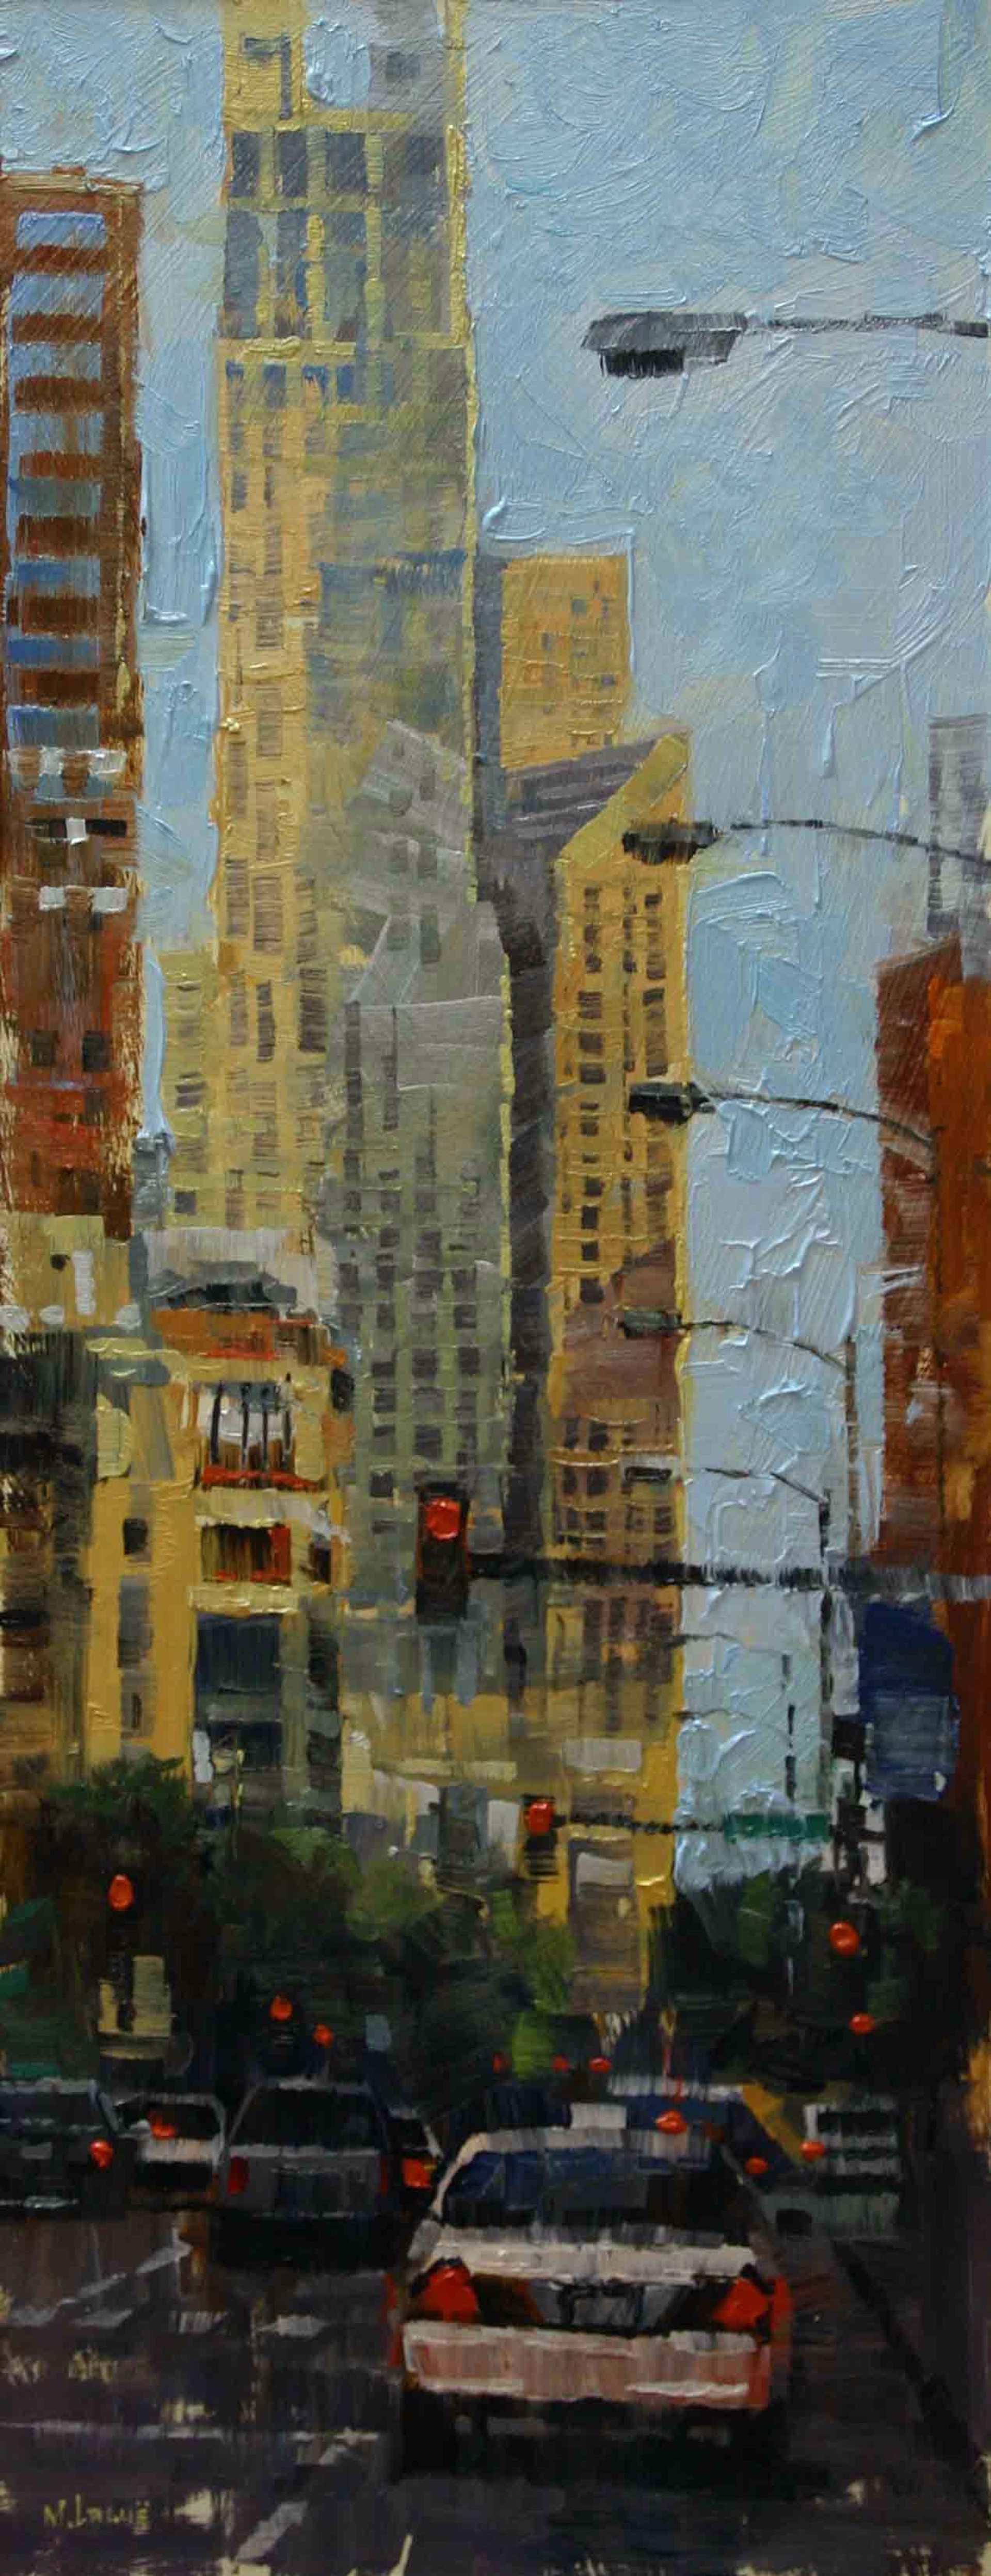 Chicago Traffic Lights by MARK LAGUE